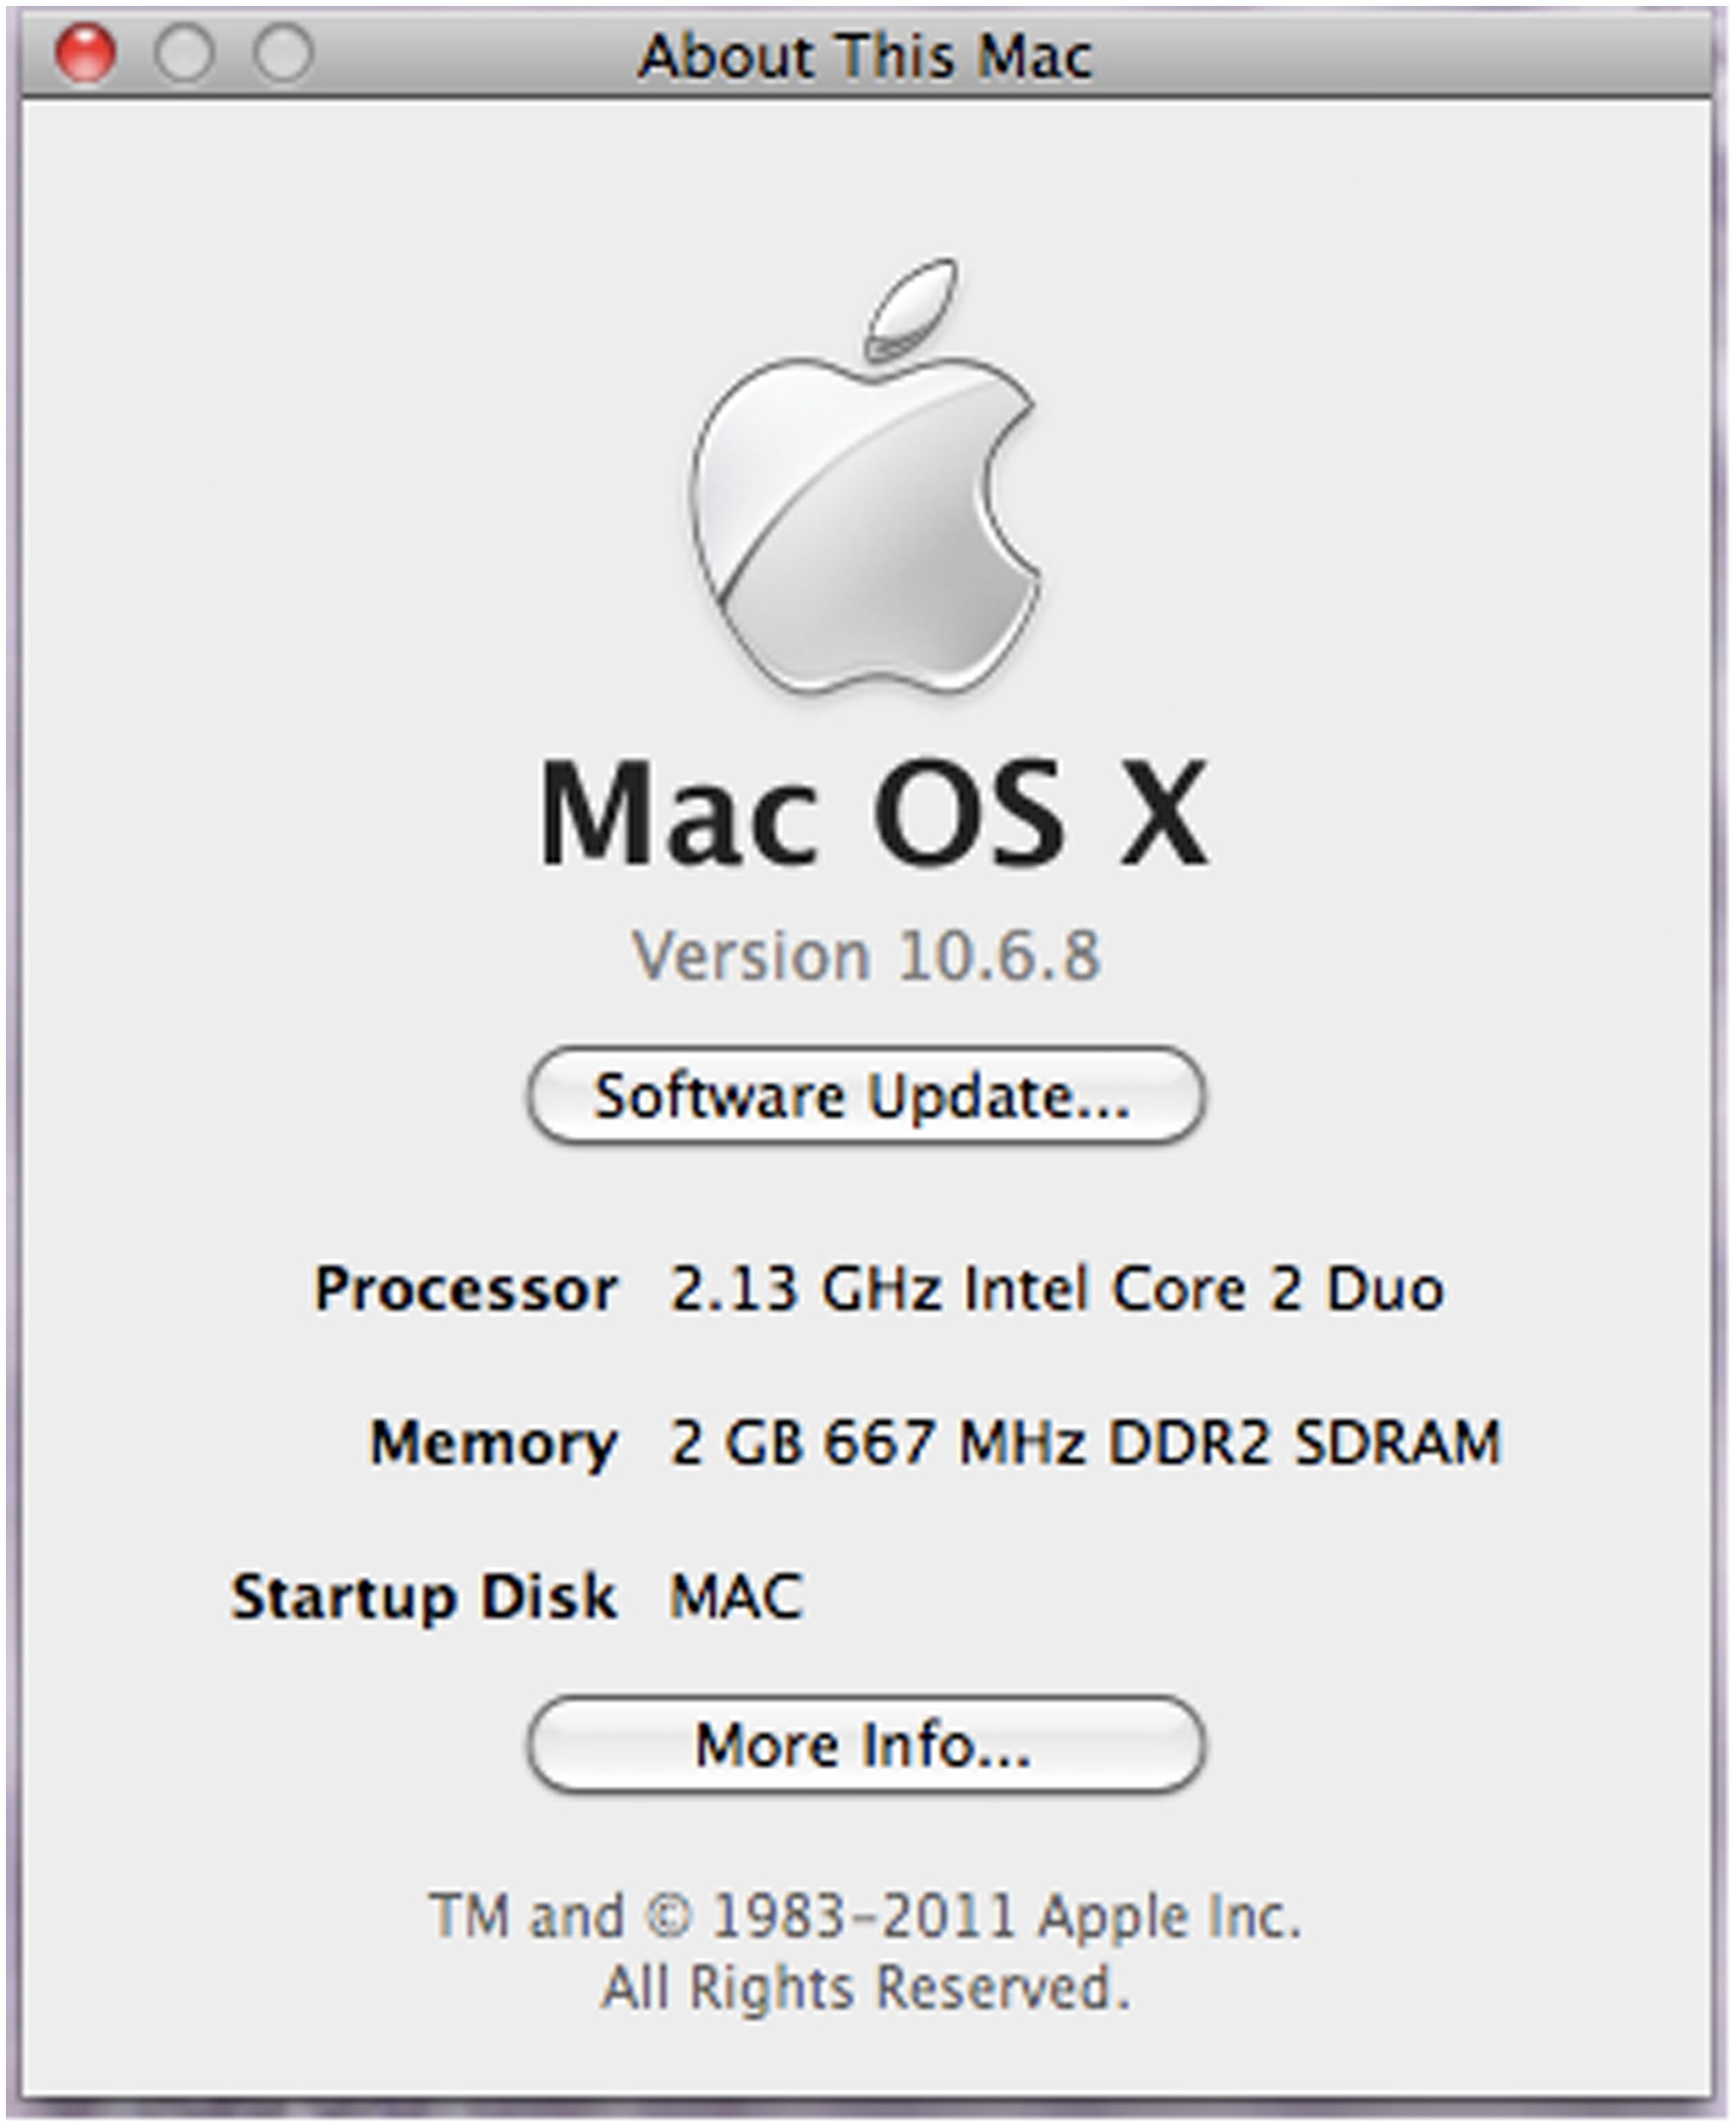 Nokia pc suite for mac os x mountain lion system requirements